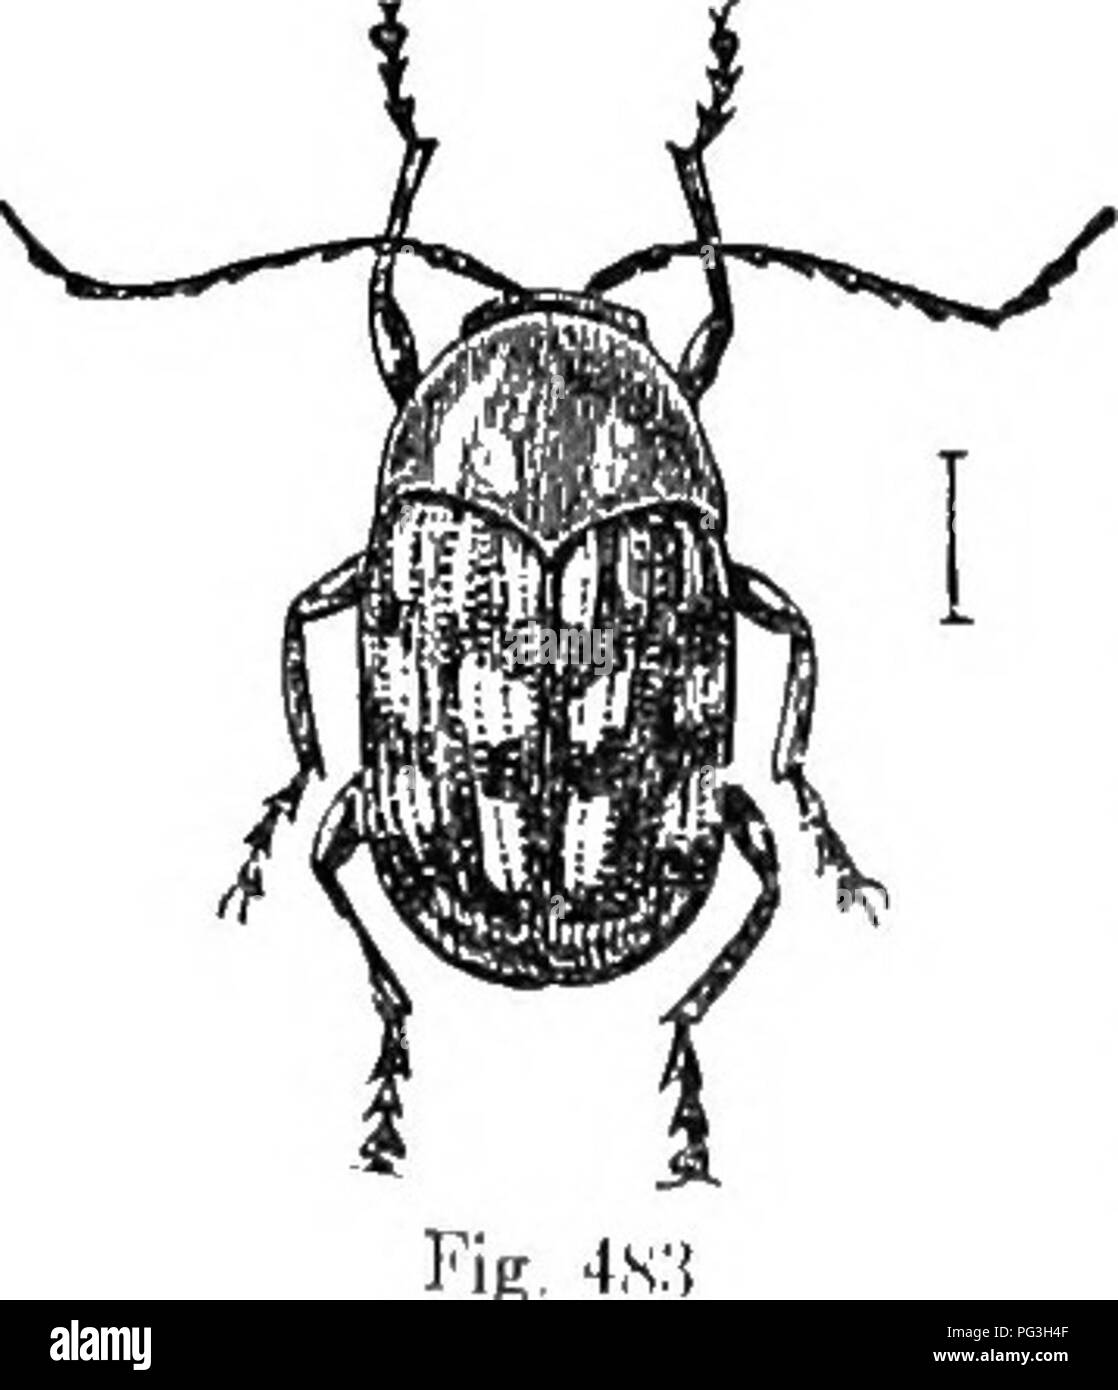 . An illustrated descriptive catalogue of the coleoptera or beetles (exclusive of the Rhynchophora) known to occur in Indiana : with bibliography and descriptions of new species . Beetles. 1118 FAAIILY LIII. CIIRVSOirELID.E. KEY TO INDIANA SPECIES OF UASSAEEUS. ((. Elytra with either spots or stripes. i. Elytra each with two or more reddish, black, or yellow spots, c. Spots on each elytron four or more. d. Edge of thoracic flanks, beneath the antennaj, acutely toothed. 2058. CLATHRATIS. cid. Edge of thoracic flanks only feebly sinuate. e. Elytra black or piceous, the spots yellow. 2059. fokmo Stock Photo